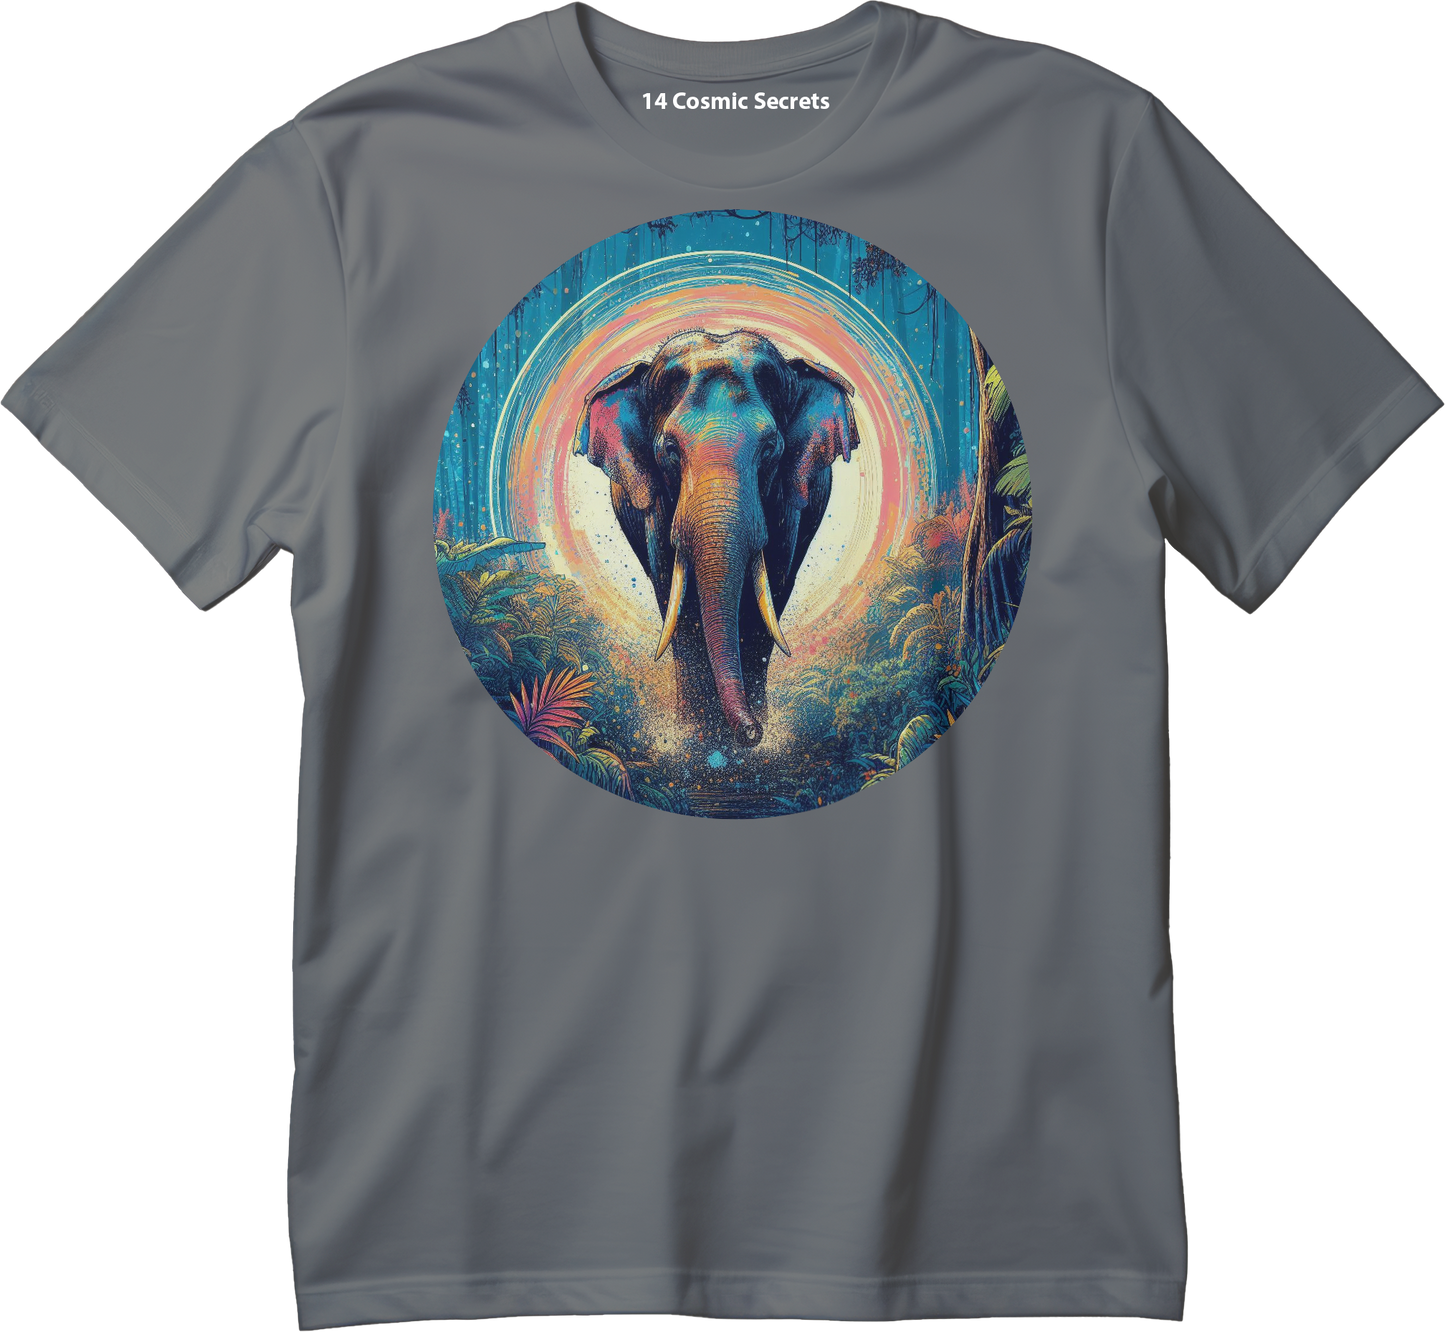 Royal Indian Elephant T-Shirt  Graphic Printed T-Shirt  Cotton T-Shirt Magnificence of India T-Shirt